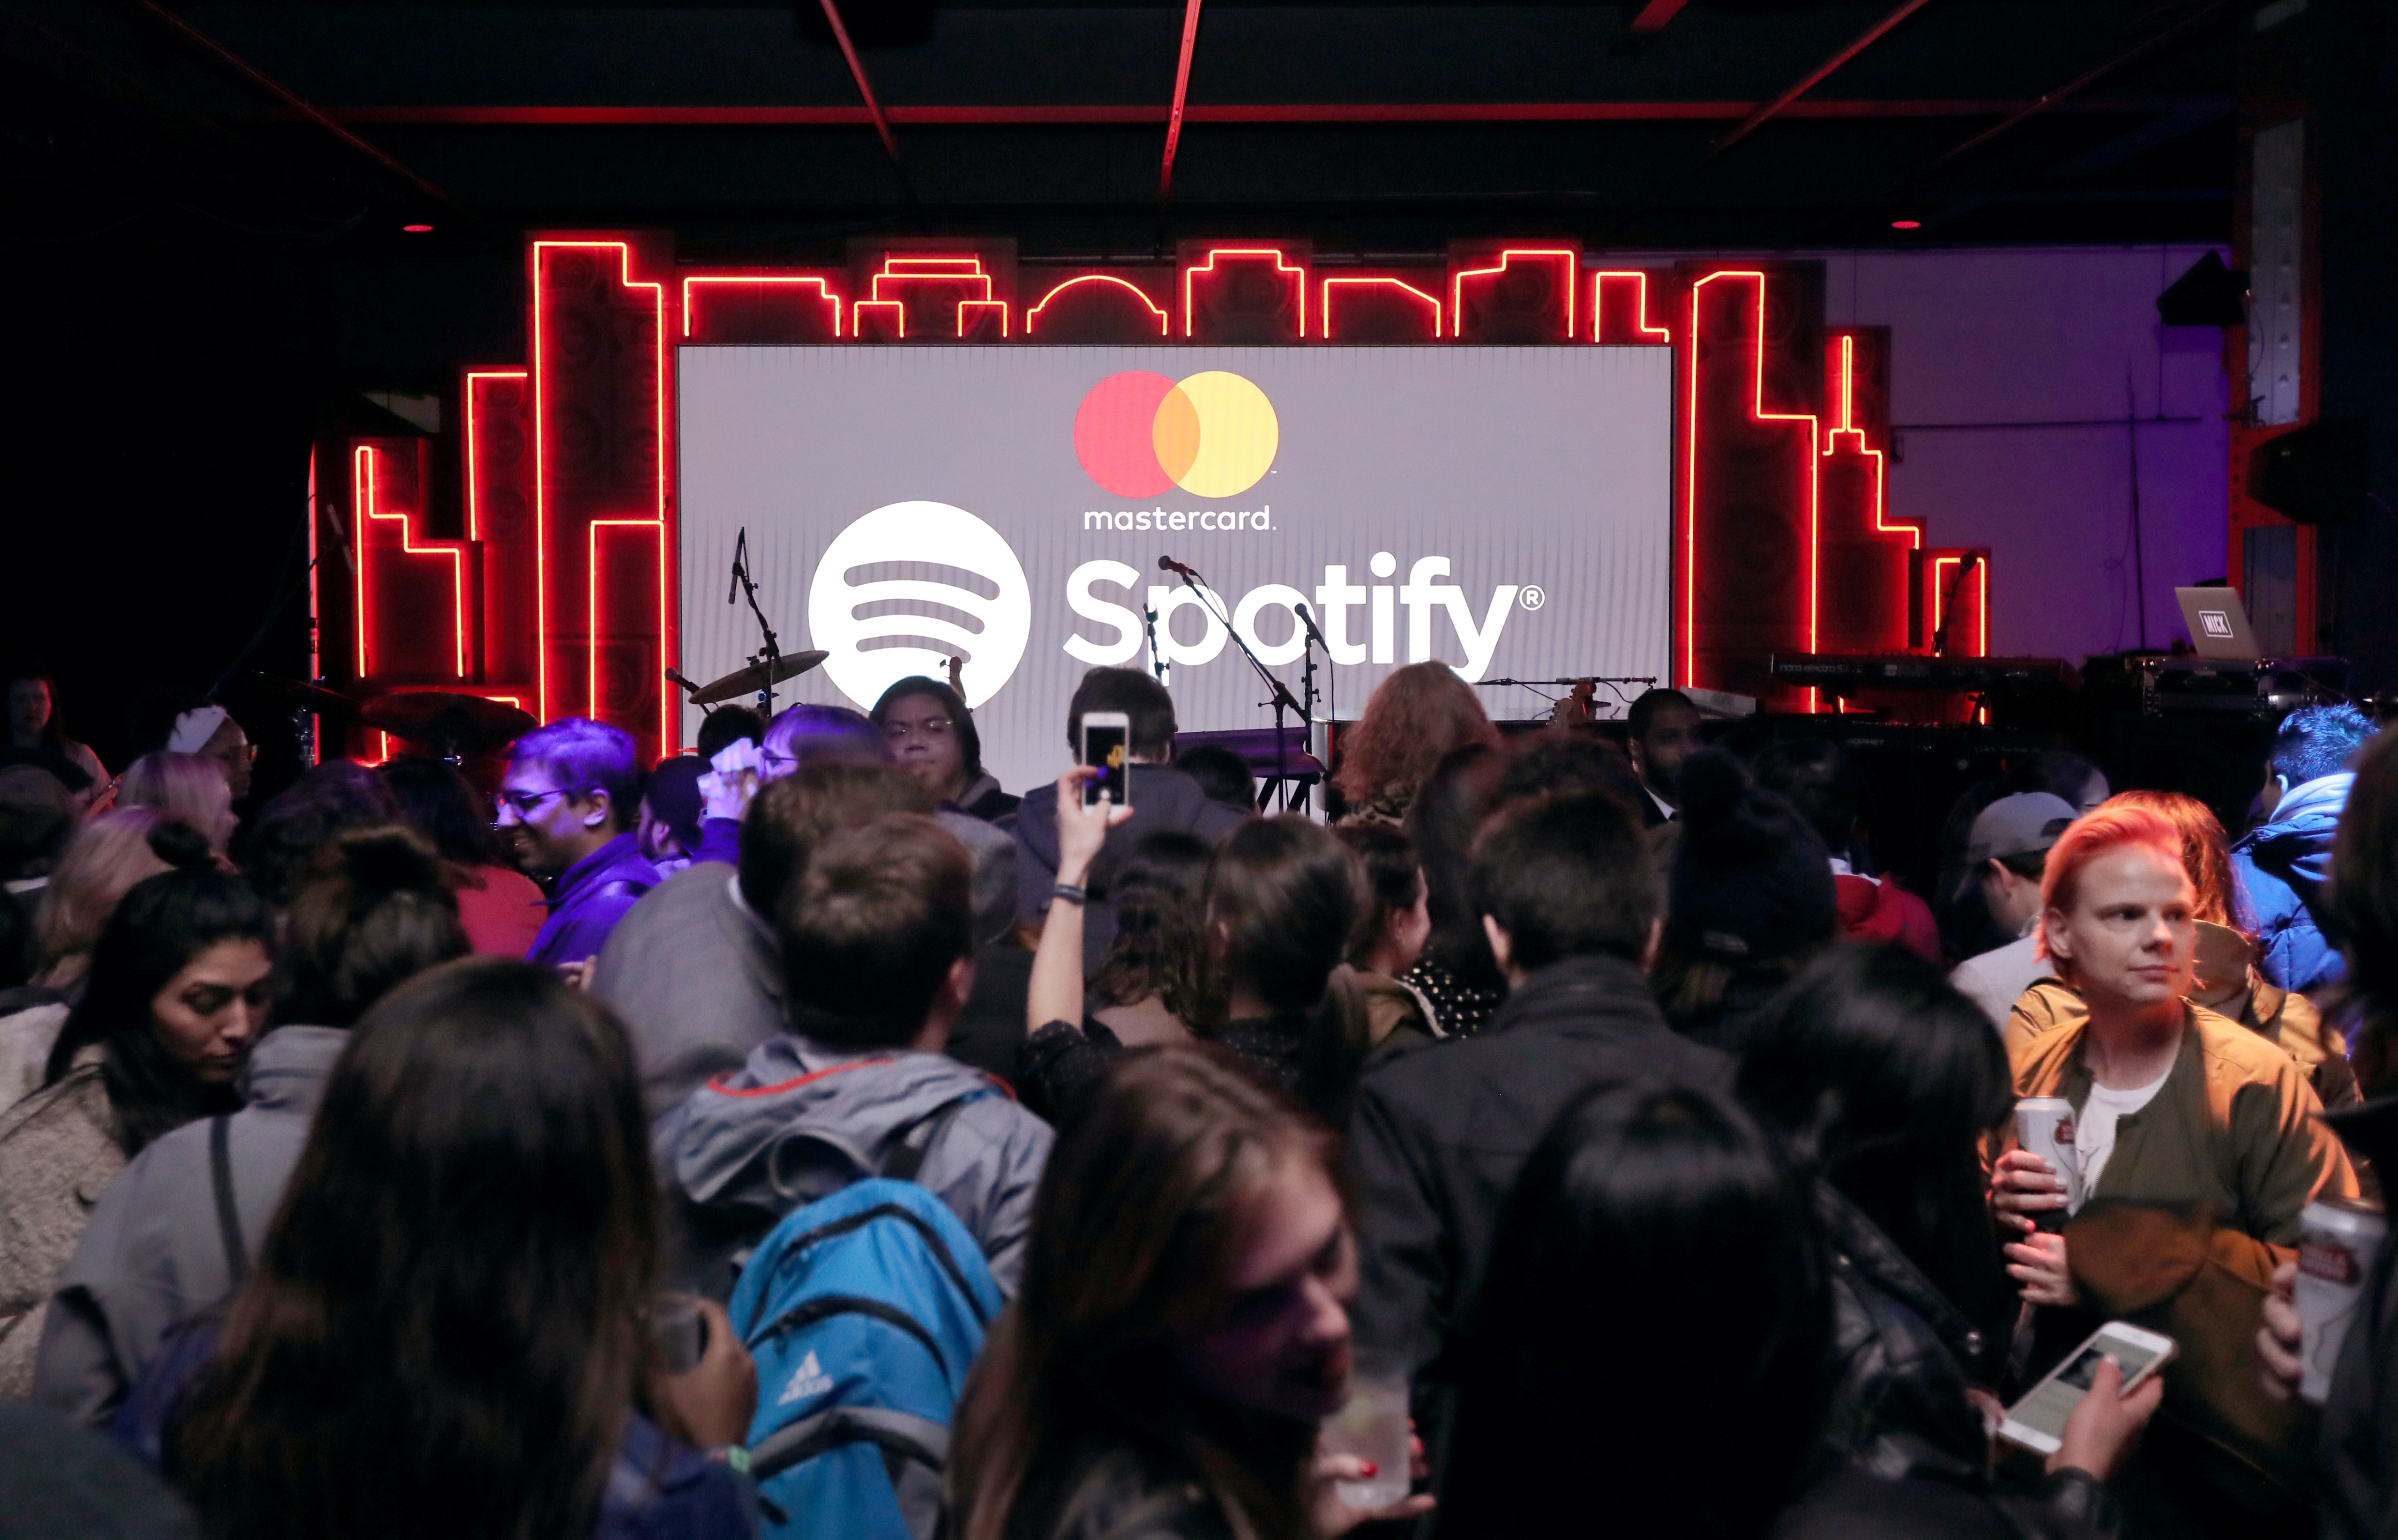 A crowd of people around a stage at a Spotify event co-sponsored by Mastercard